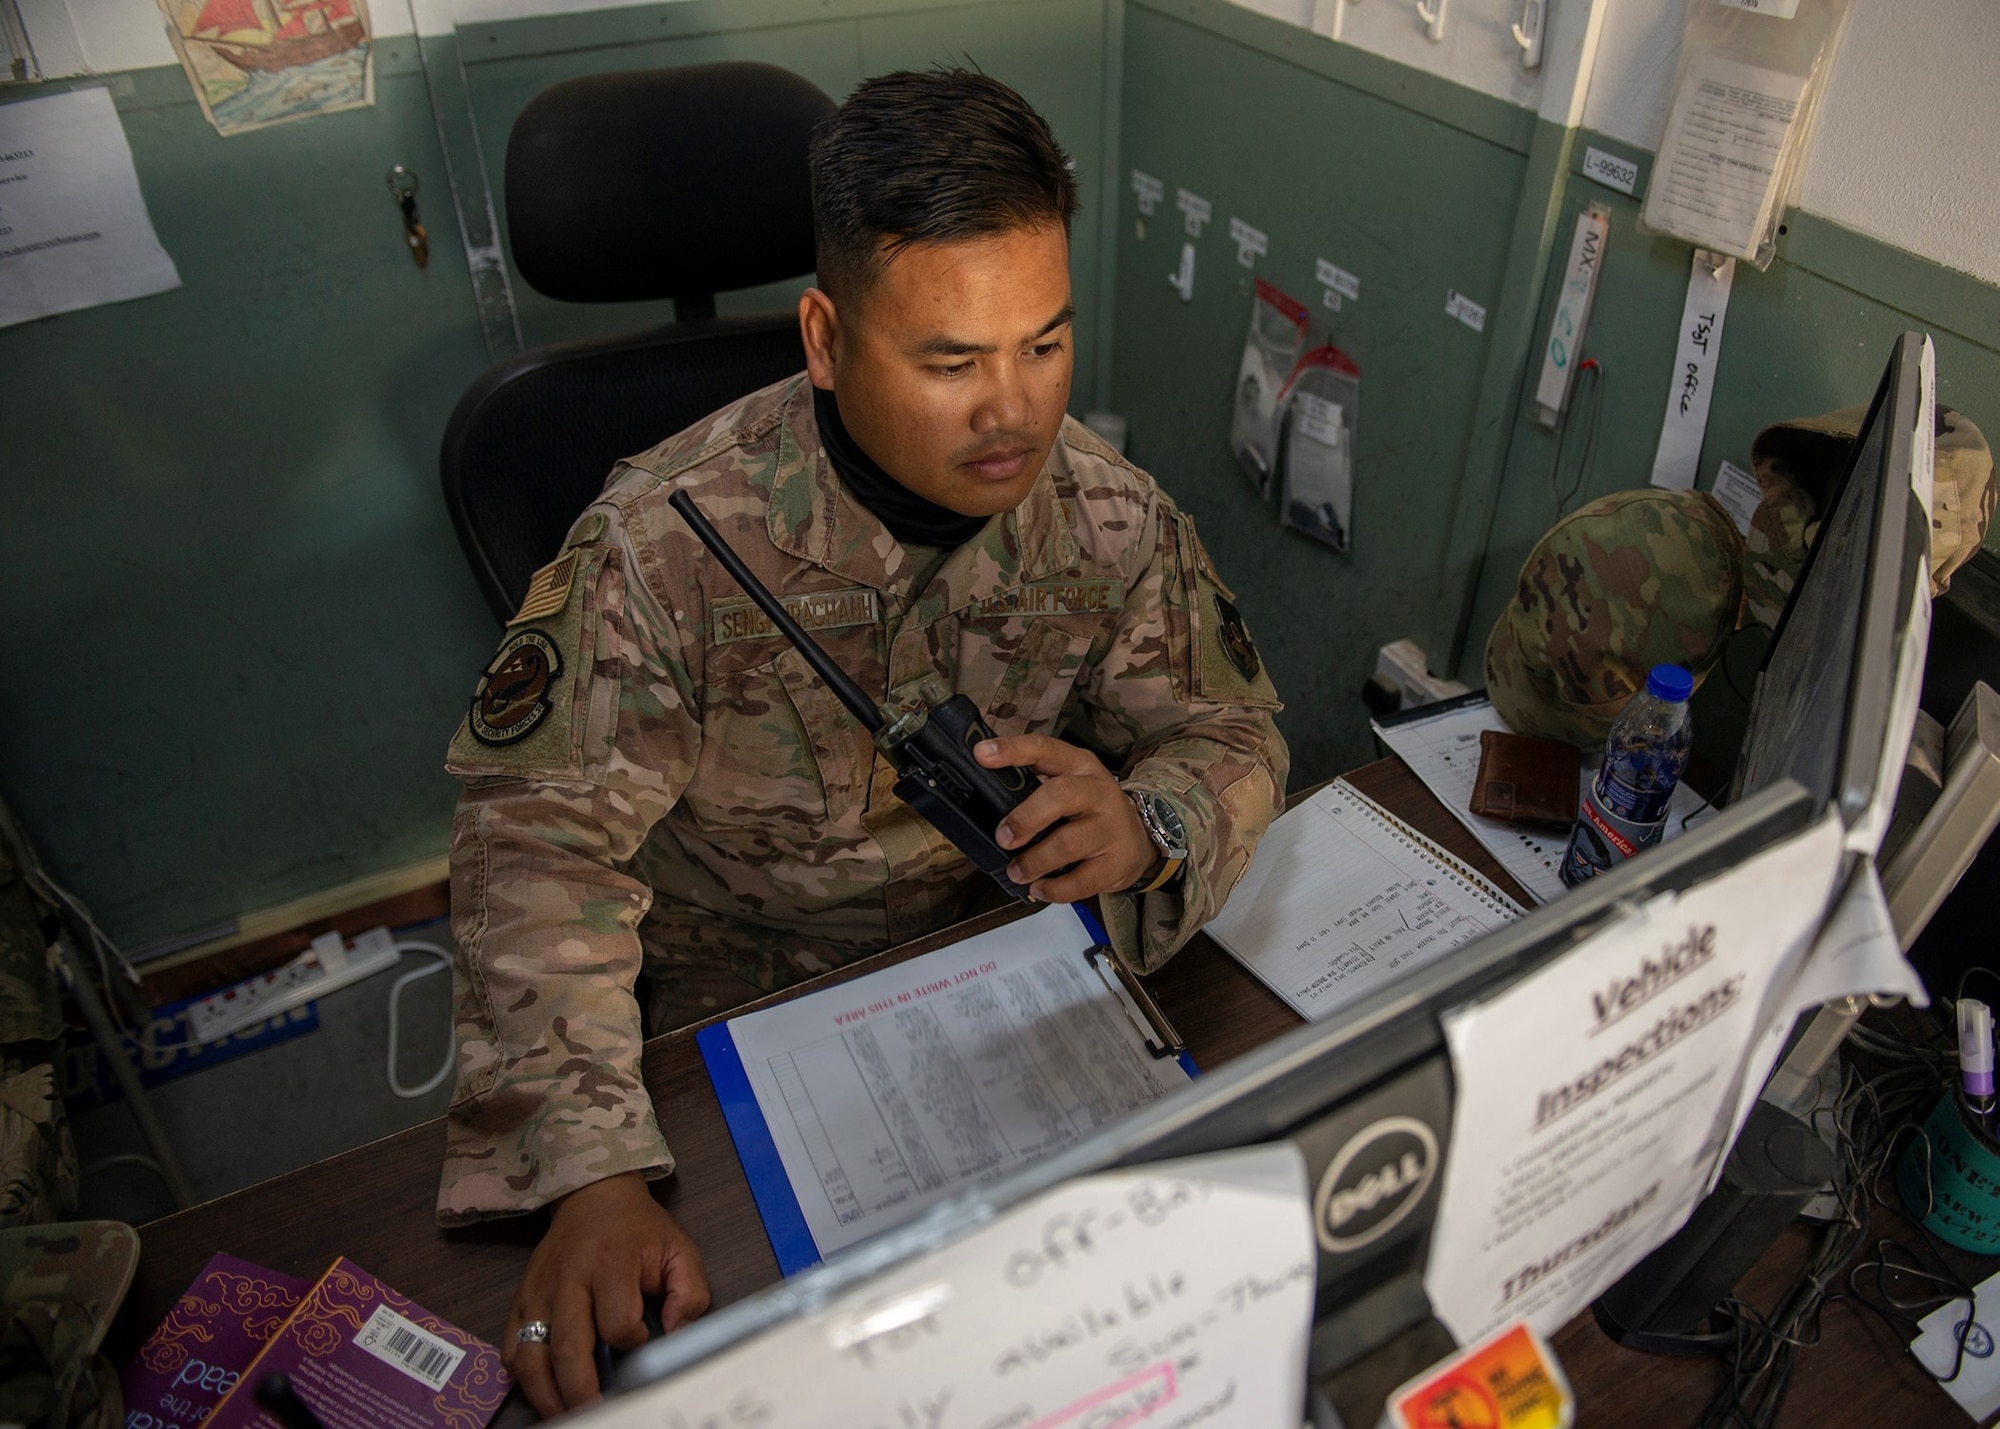 U.S. Air Force Senior Airmen Phaysawan Sengphrachanh, 380th Expeditionary Security Forces Squadron Force Protection Hawkeye flight escort, uses a radio to contact personnel at Al Dhafra Air Base, United Arab Emirates, Nov. 22, 2020.